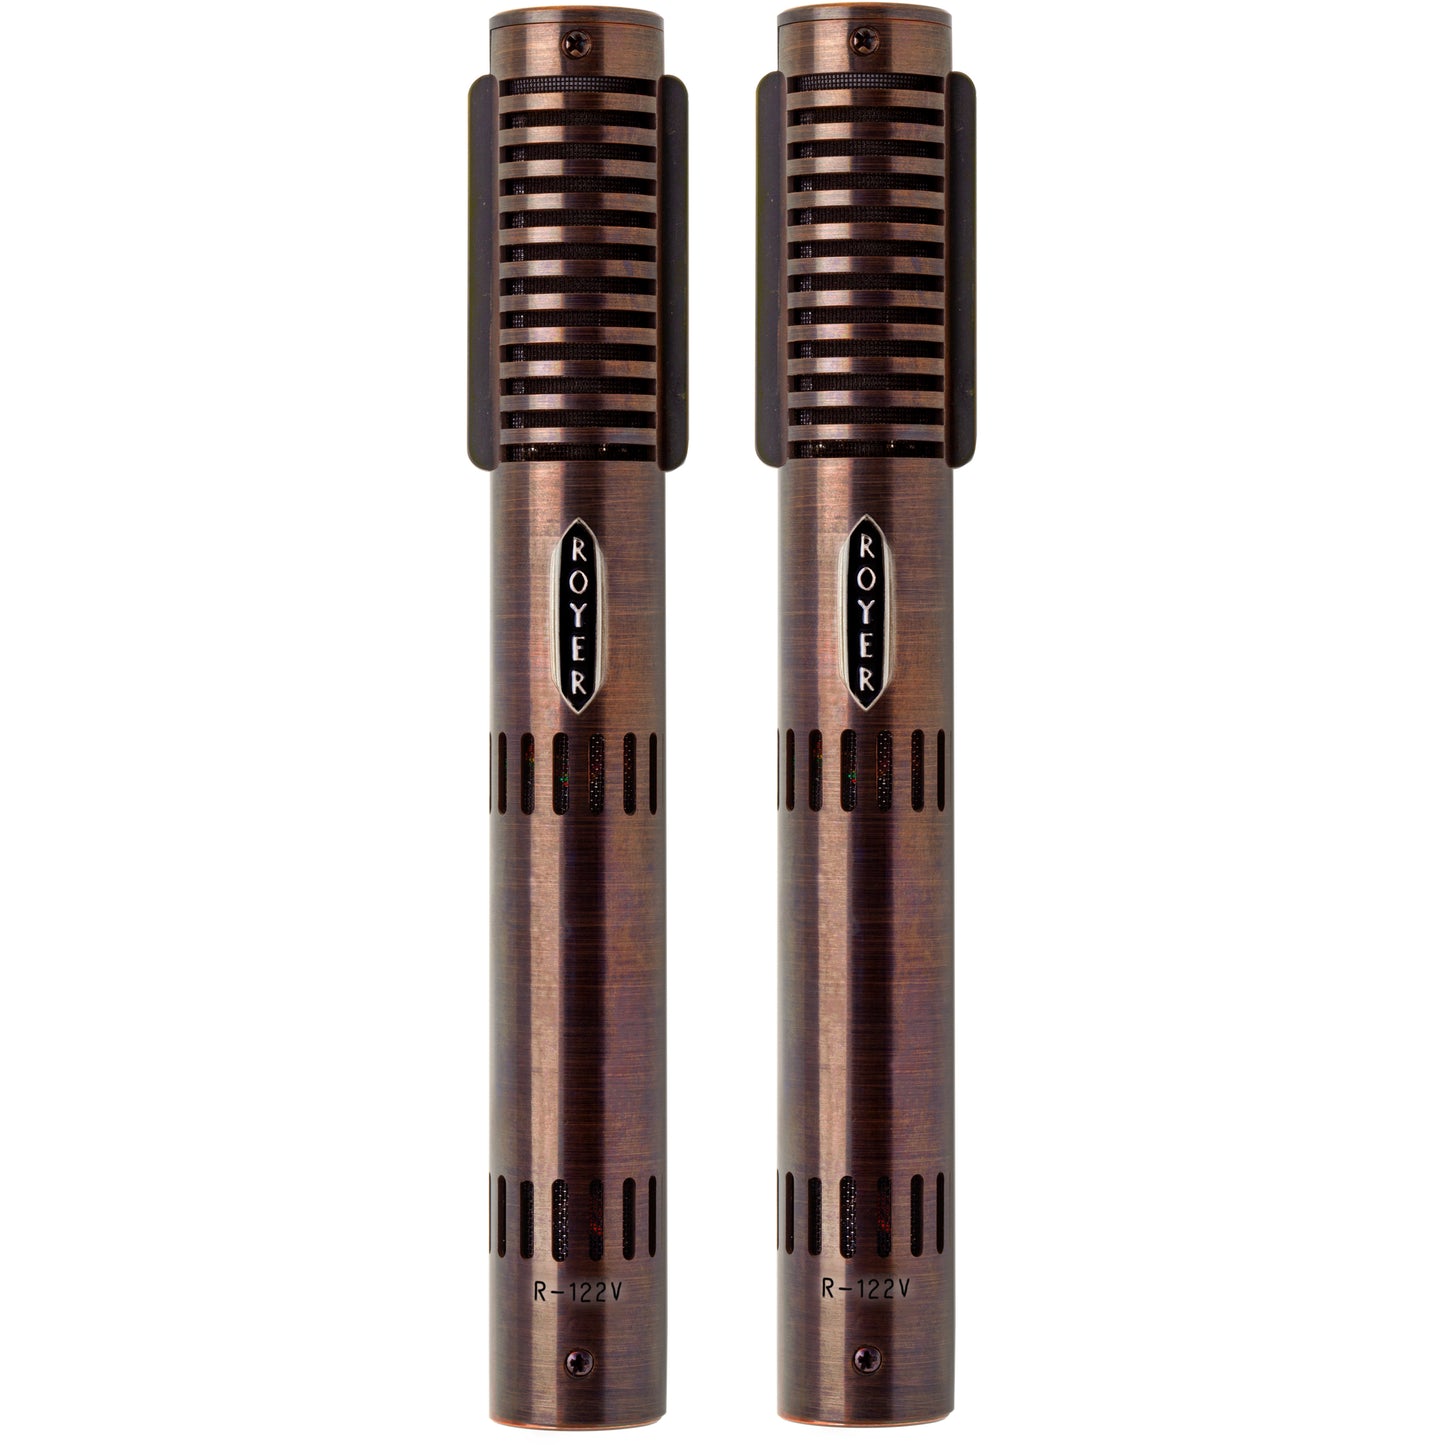 Royer R-122V 25th Anniversary Distressed Rose Vacuum Tube Ribbon Microphone, Matched Pair